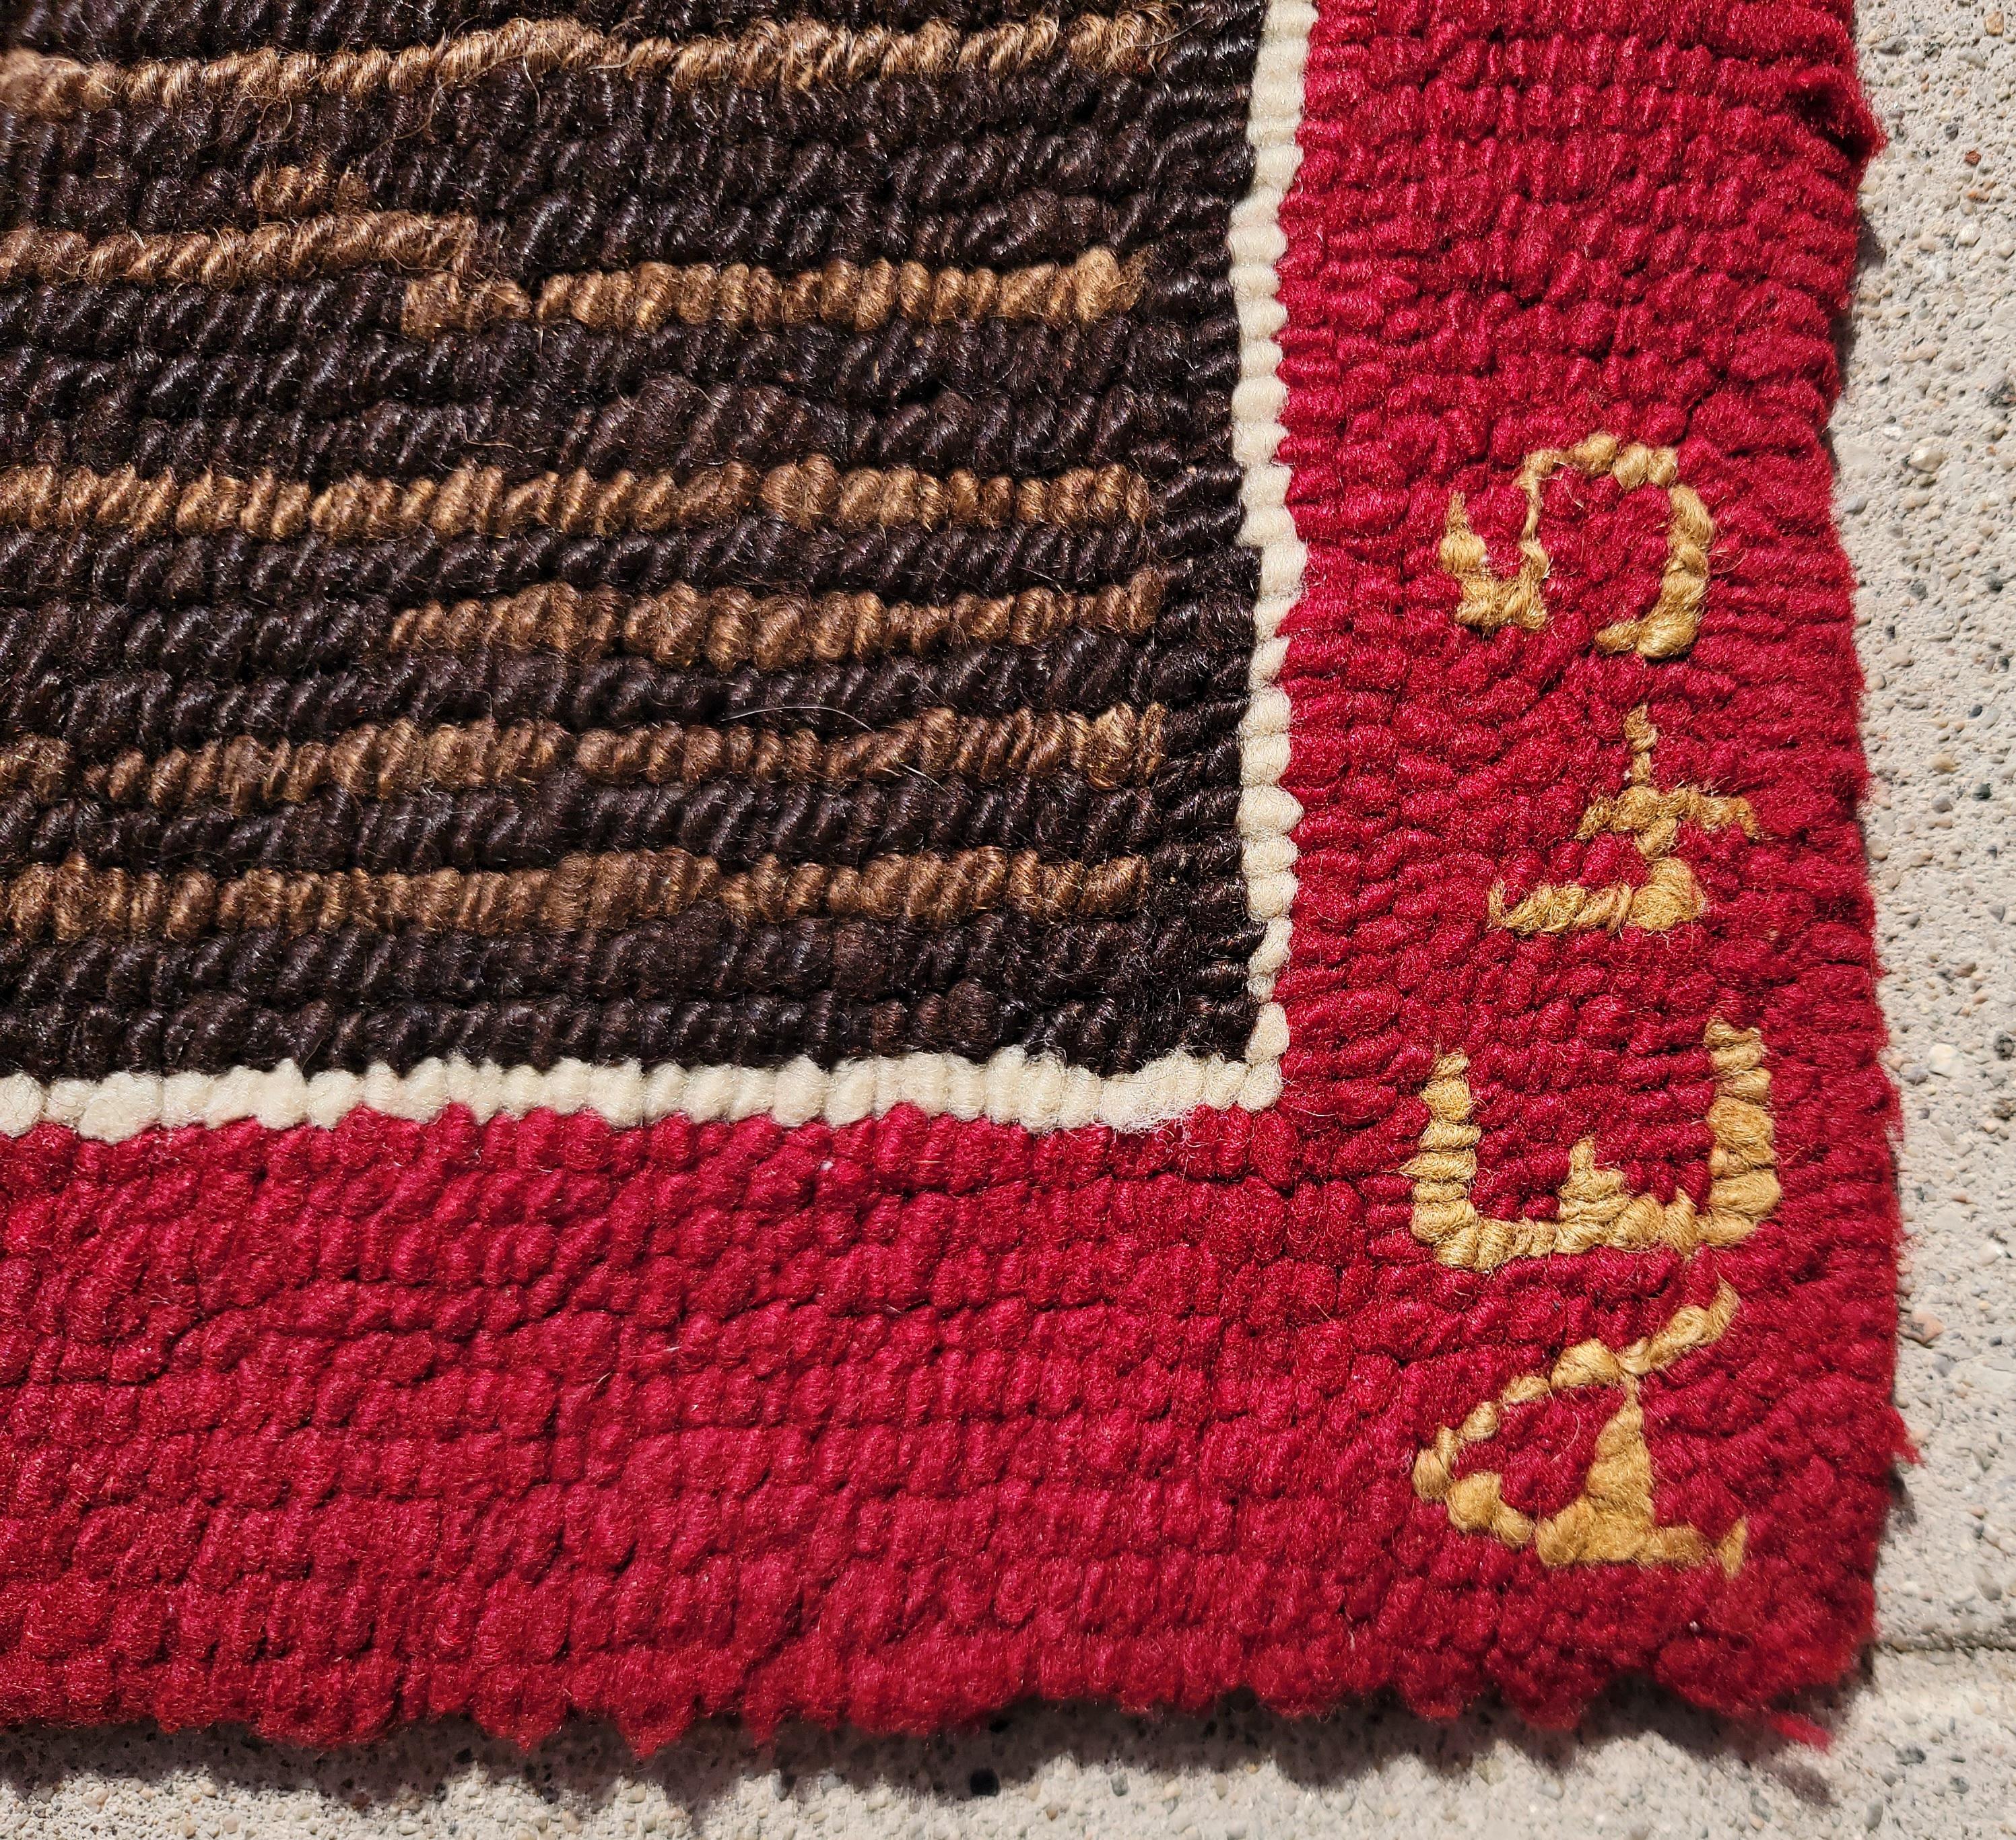 Hand hooked geometric rug from Pennsylvania that is signed & dated 1945. This fine hooked rug is in fine condition.